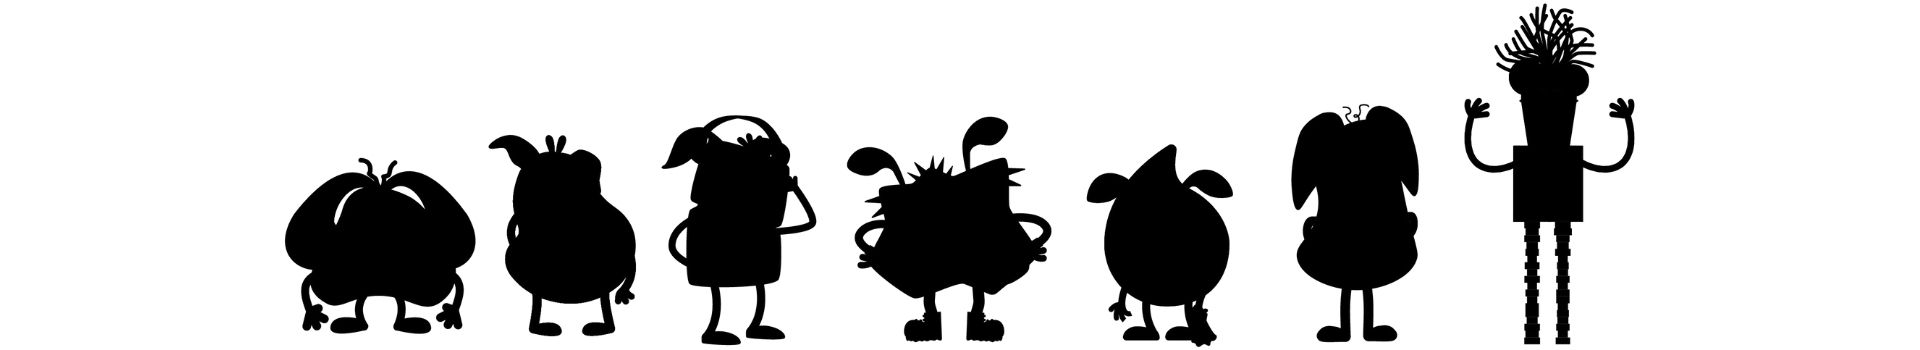 outline of monster characters in black silhouette